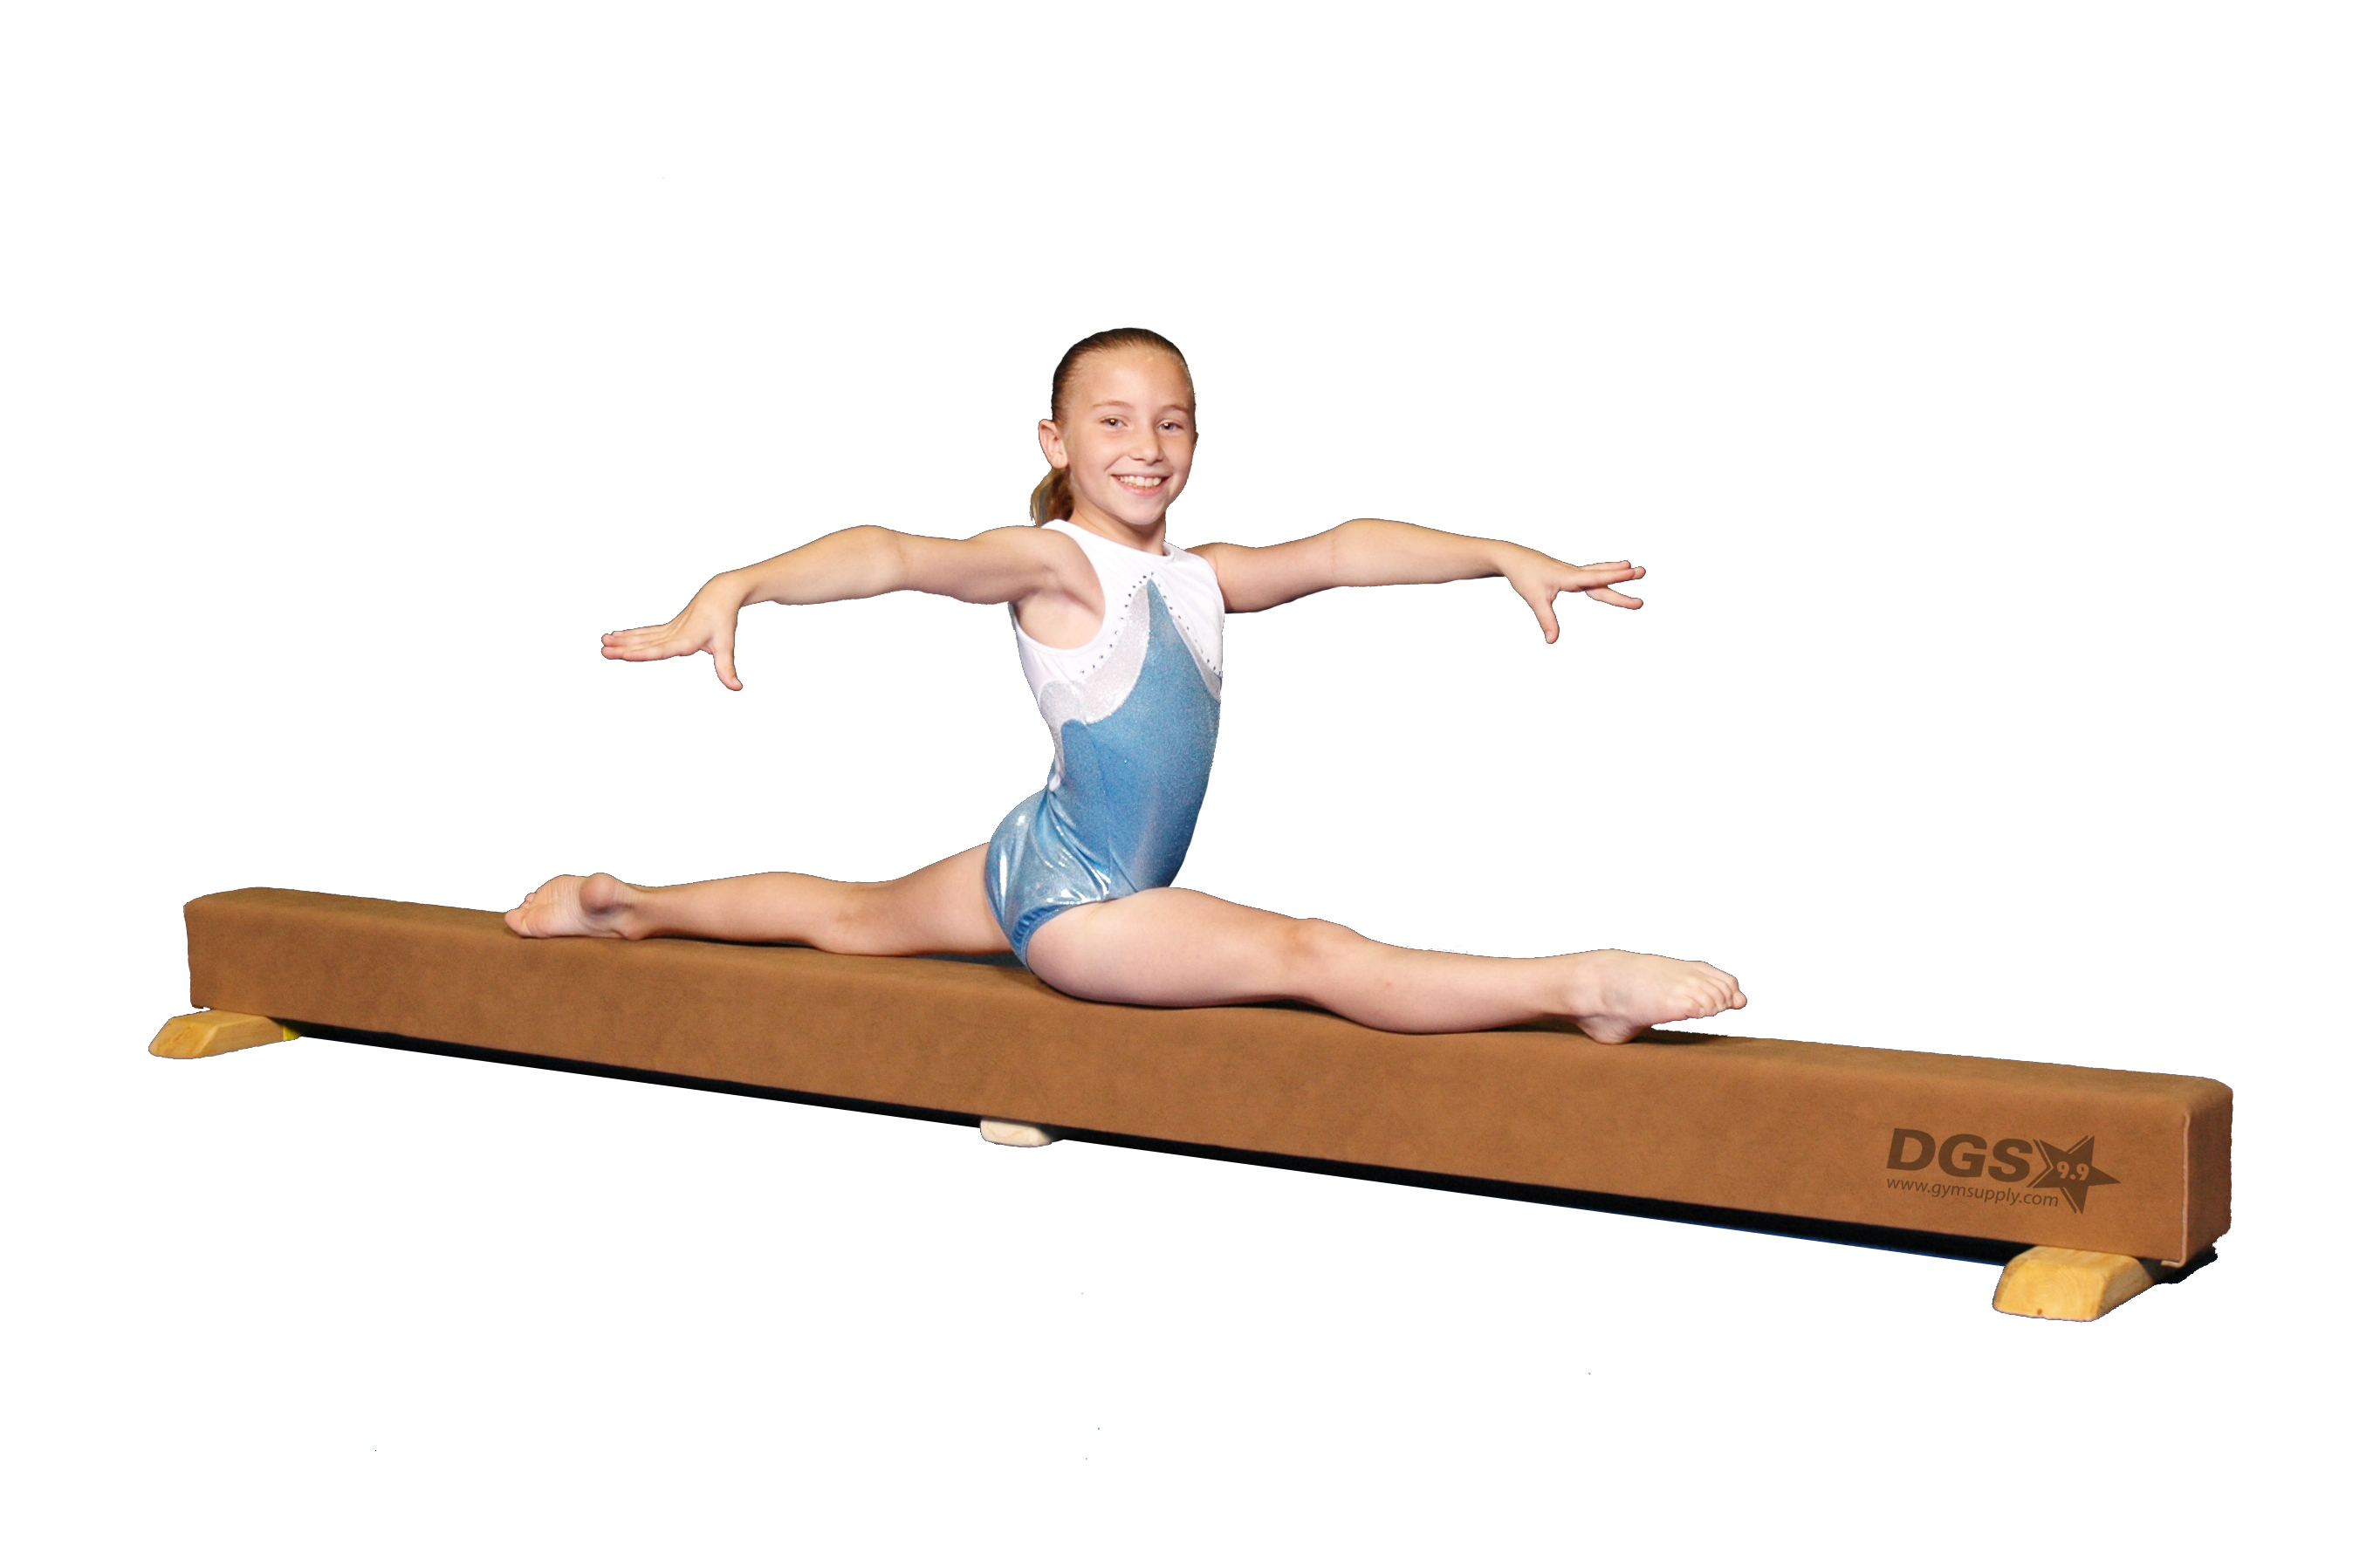 At Home Training Products For The Gymnasts In Your Life Inside Gymnastics Magazine